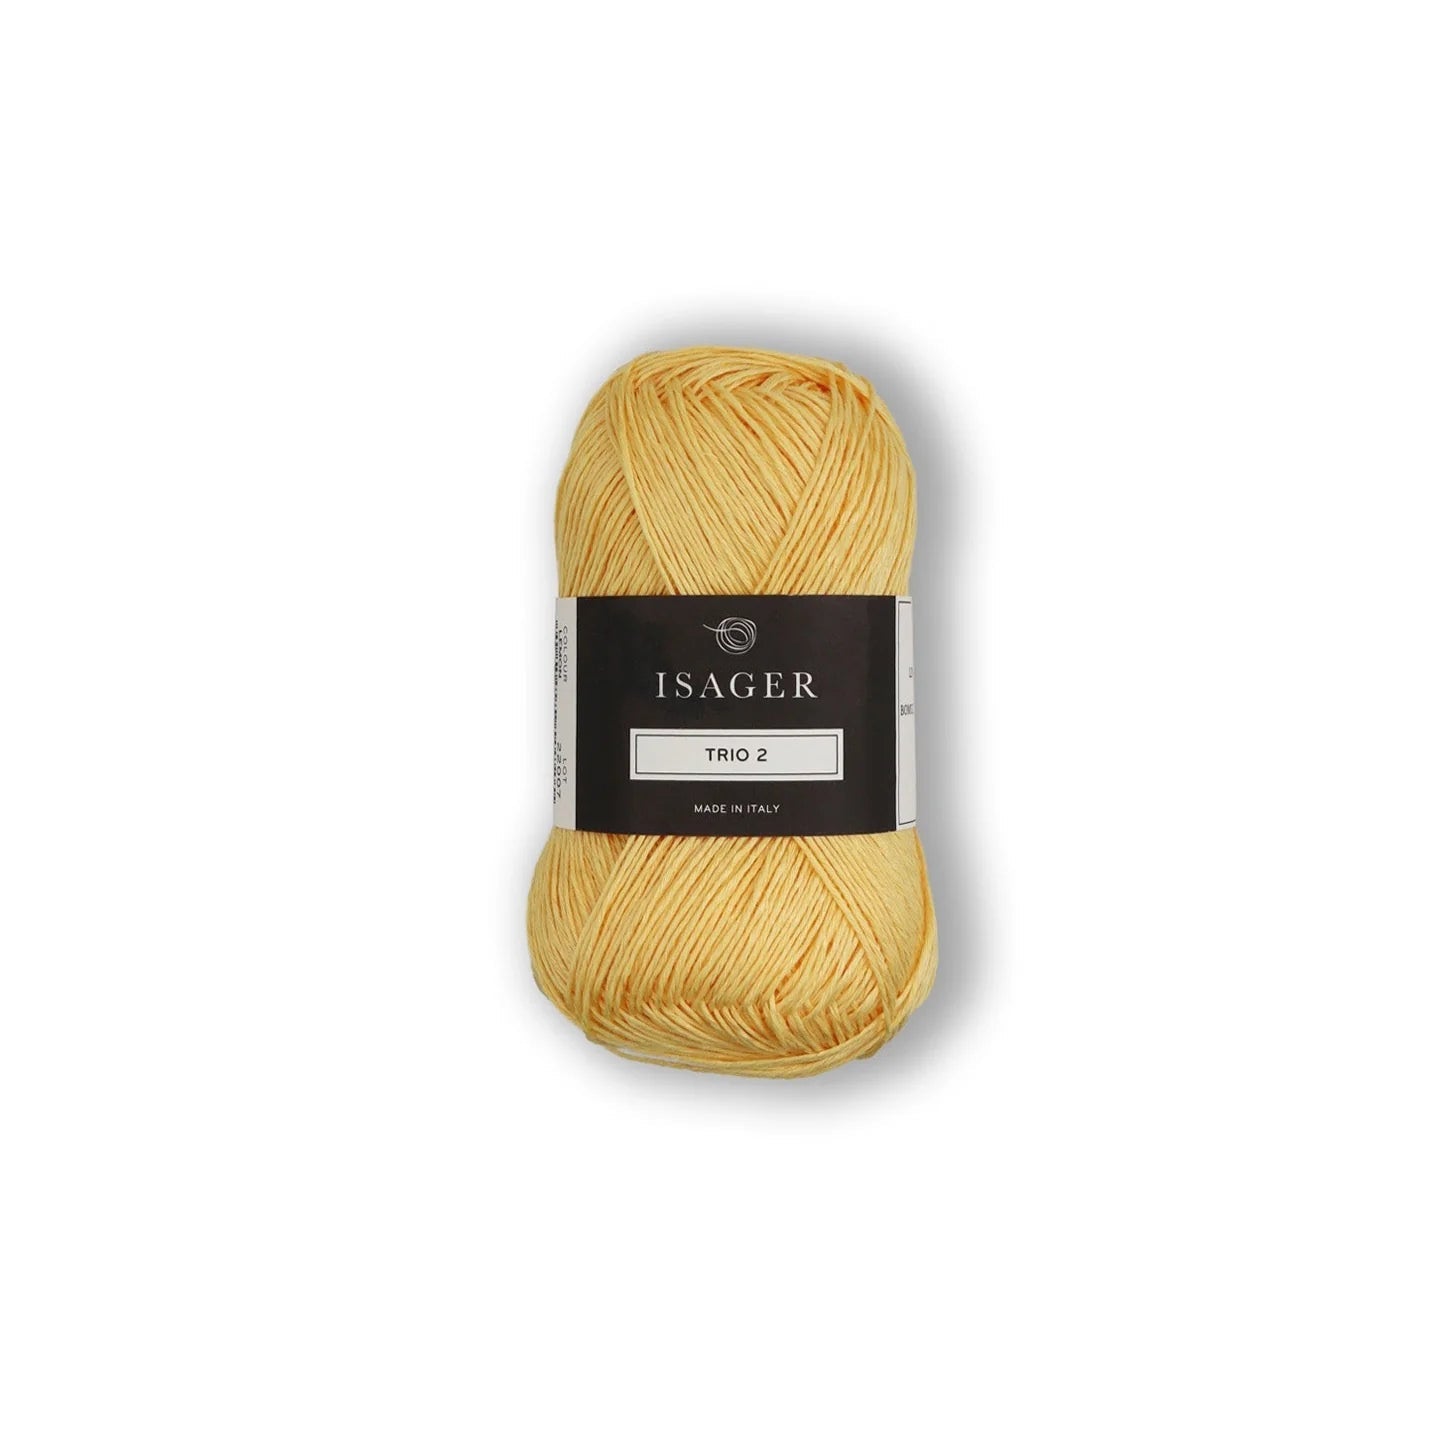 Isager Trio 2 - Lemon - 5 Ply - Cotton - The Little Yarn Store